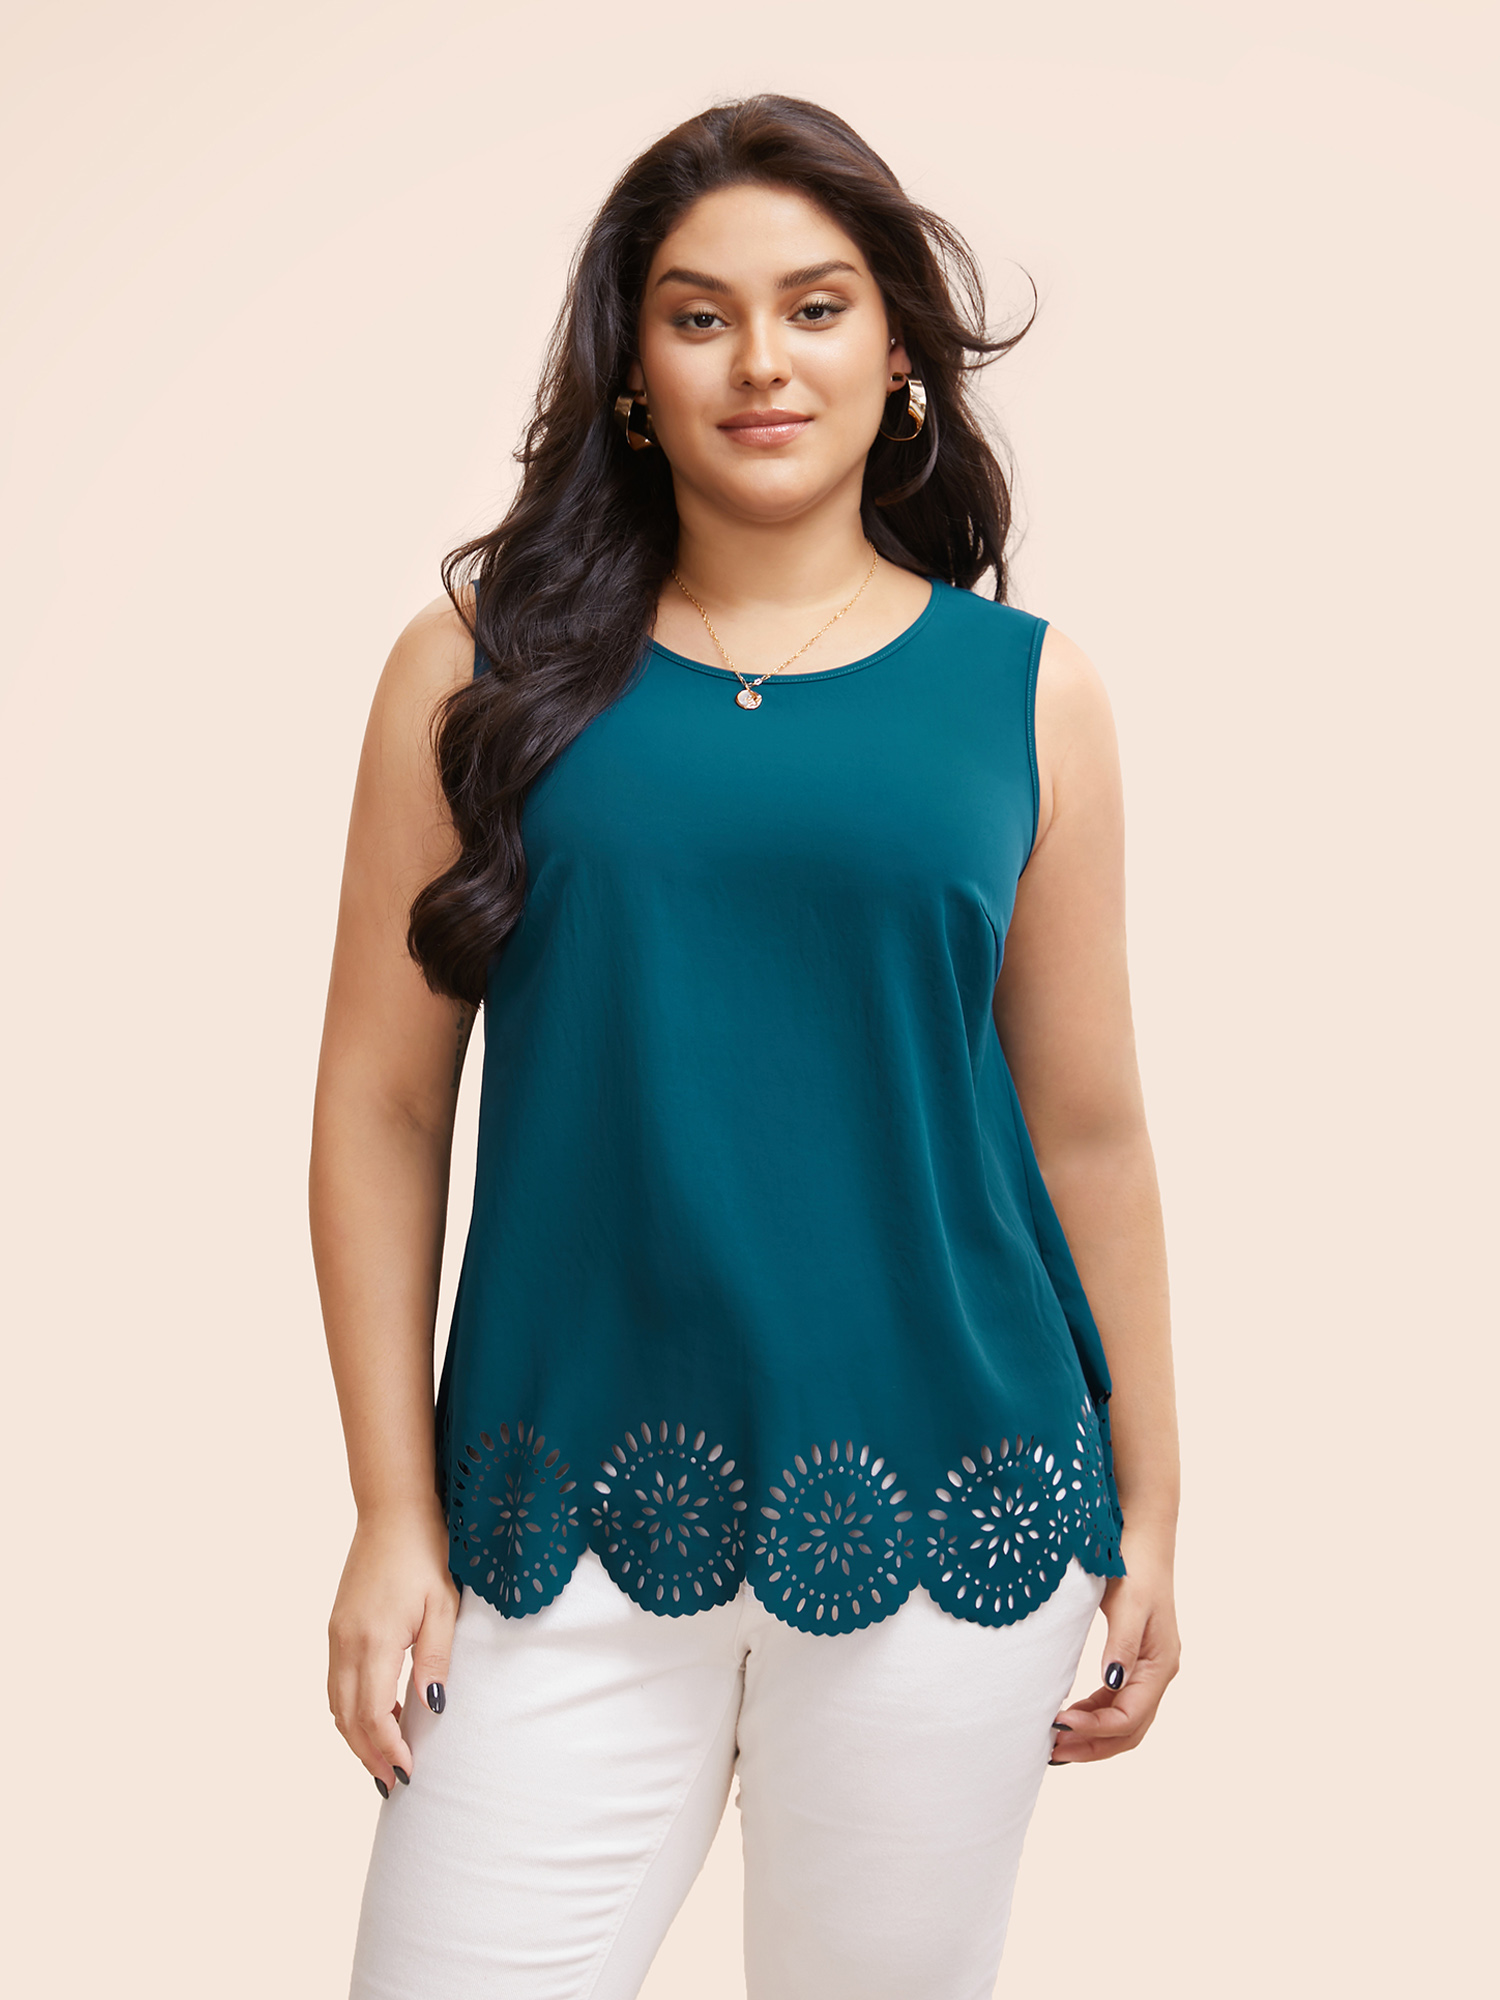 

Plus Size Solid Crew Neck Laser Cut Tank Top Women Aegean Elegant Cut-Out Round Neck Everyday Tank Tops Camis BloomChic